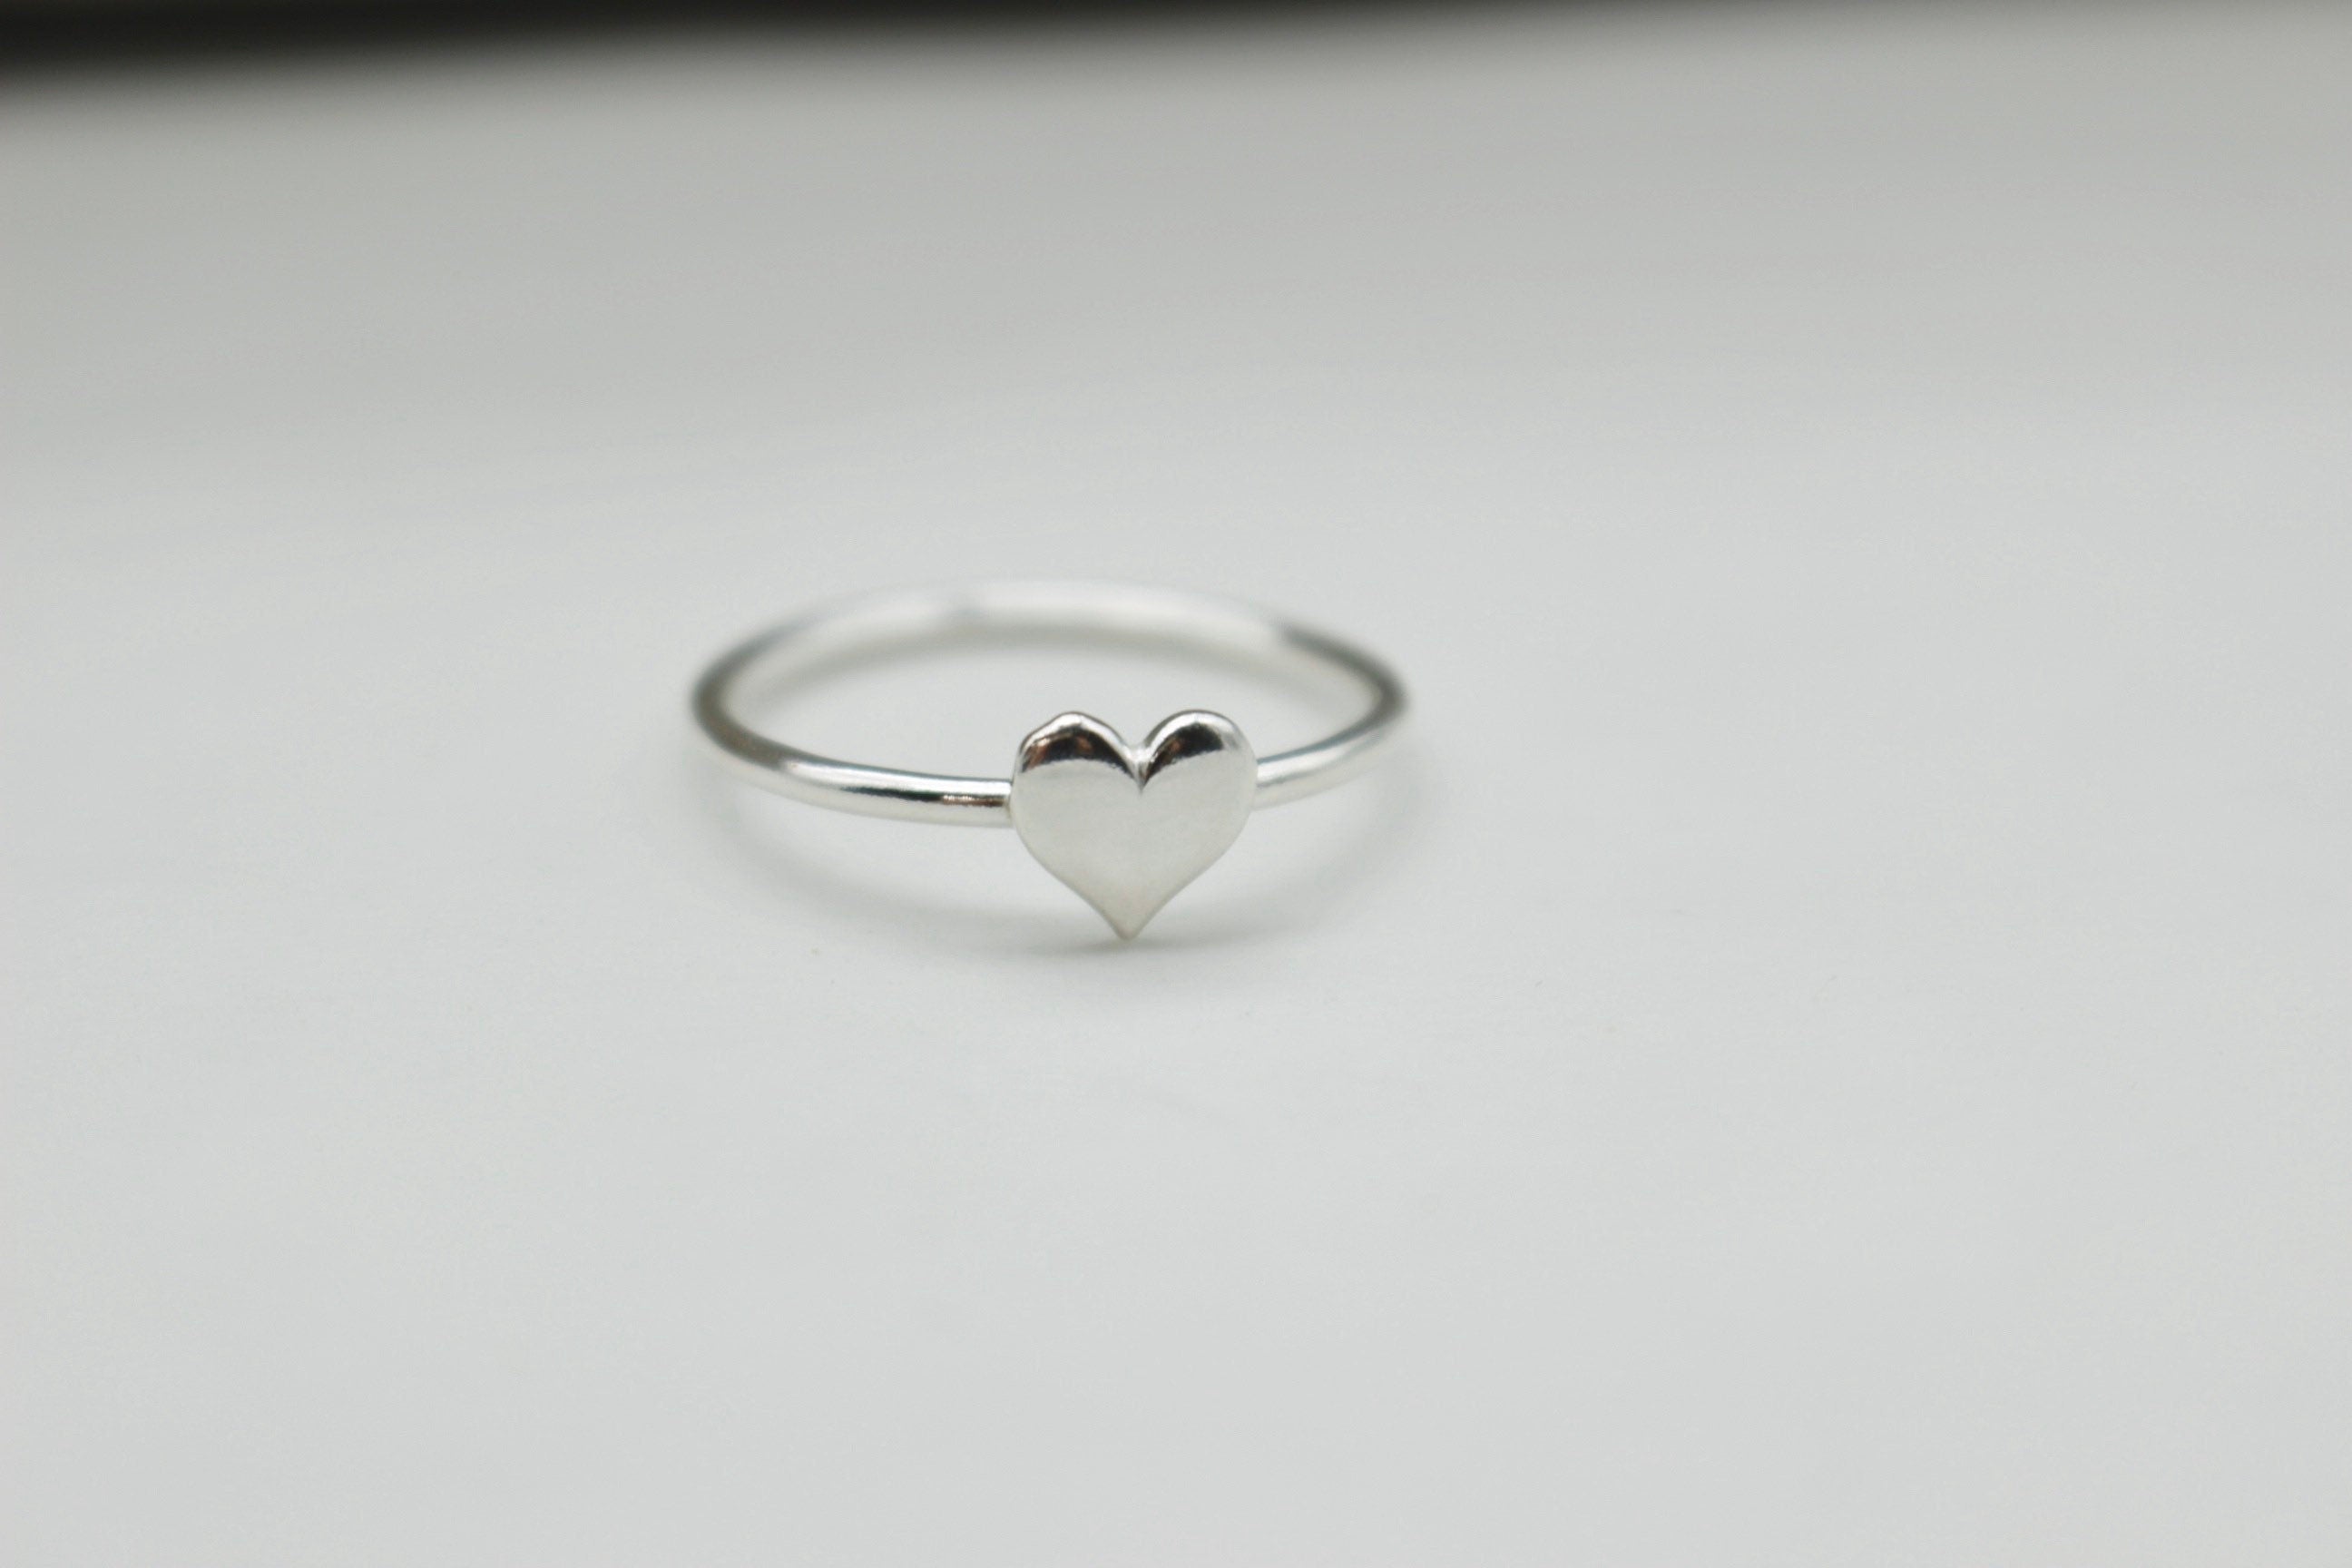 Sterling silver heart ring - Midi heart ring - gift for her - silver ring with heart - jewelry sale